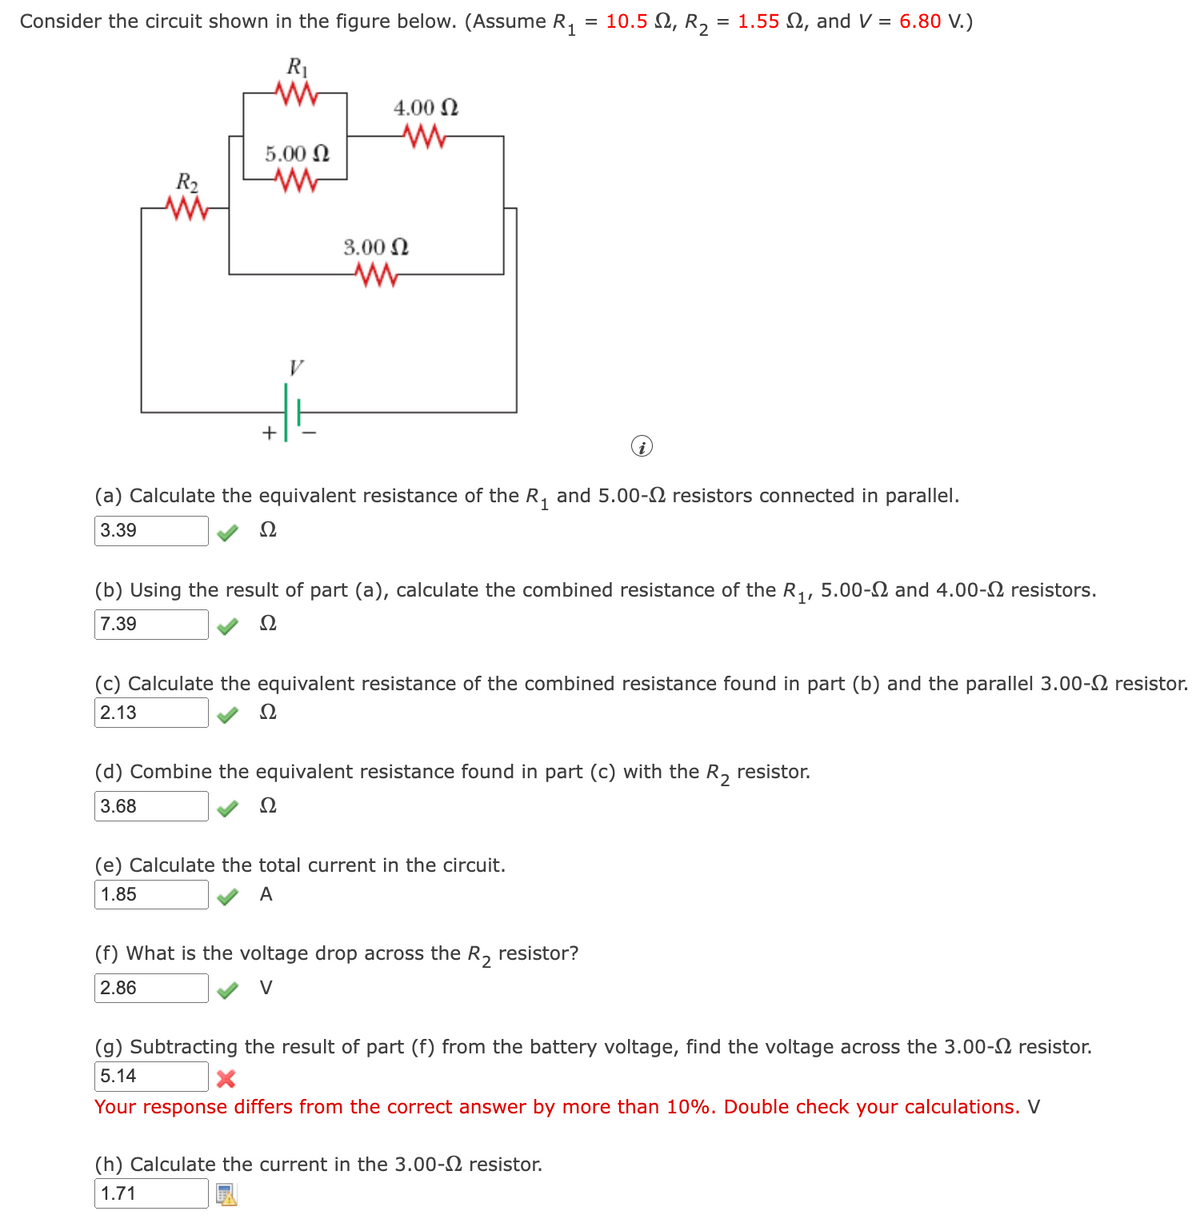 Consider the circuit shown in the figure below. (Assume R, = 10.5 N, R, = 1.55 N, and V = 6.80 V.)
R1
4.00 N
5.00 N
R2
3.00 N
V
+
(a) Calculate the equivalent resistance of the R, and 5.00-N resistors connected in parallel.
3.39
Ω
(b) Using the result of part (a), calculate the combined resistance of the R,, 5.00-2 and 4.00-2 resistors.
7.39
Ω
(c) Calculate the equivalent resistance of the combined resistance found in part (b) and the parallel 3.00-2 resistor.
2.13
Ω
(d) Combine the equivalent resistance found in part (c) with the R, resistor.
3.68
Ω
(e) Calculate the total current in the circuit.
1.85
A
(f) What is the voltage drop across the R, resistor?
2.86
V
(g) Subtracting the result of part (f) from the battery voltage, find the voltage across the 3.00-2 resistor.
5.14
Your response differs from the correct answer by more than 10%. Double check your calculations. V
(h) Calculate the current in the 3.00-2 resistor.
1.71
